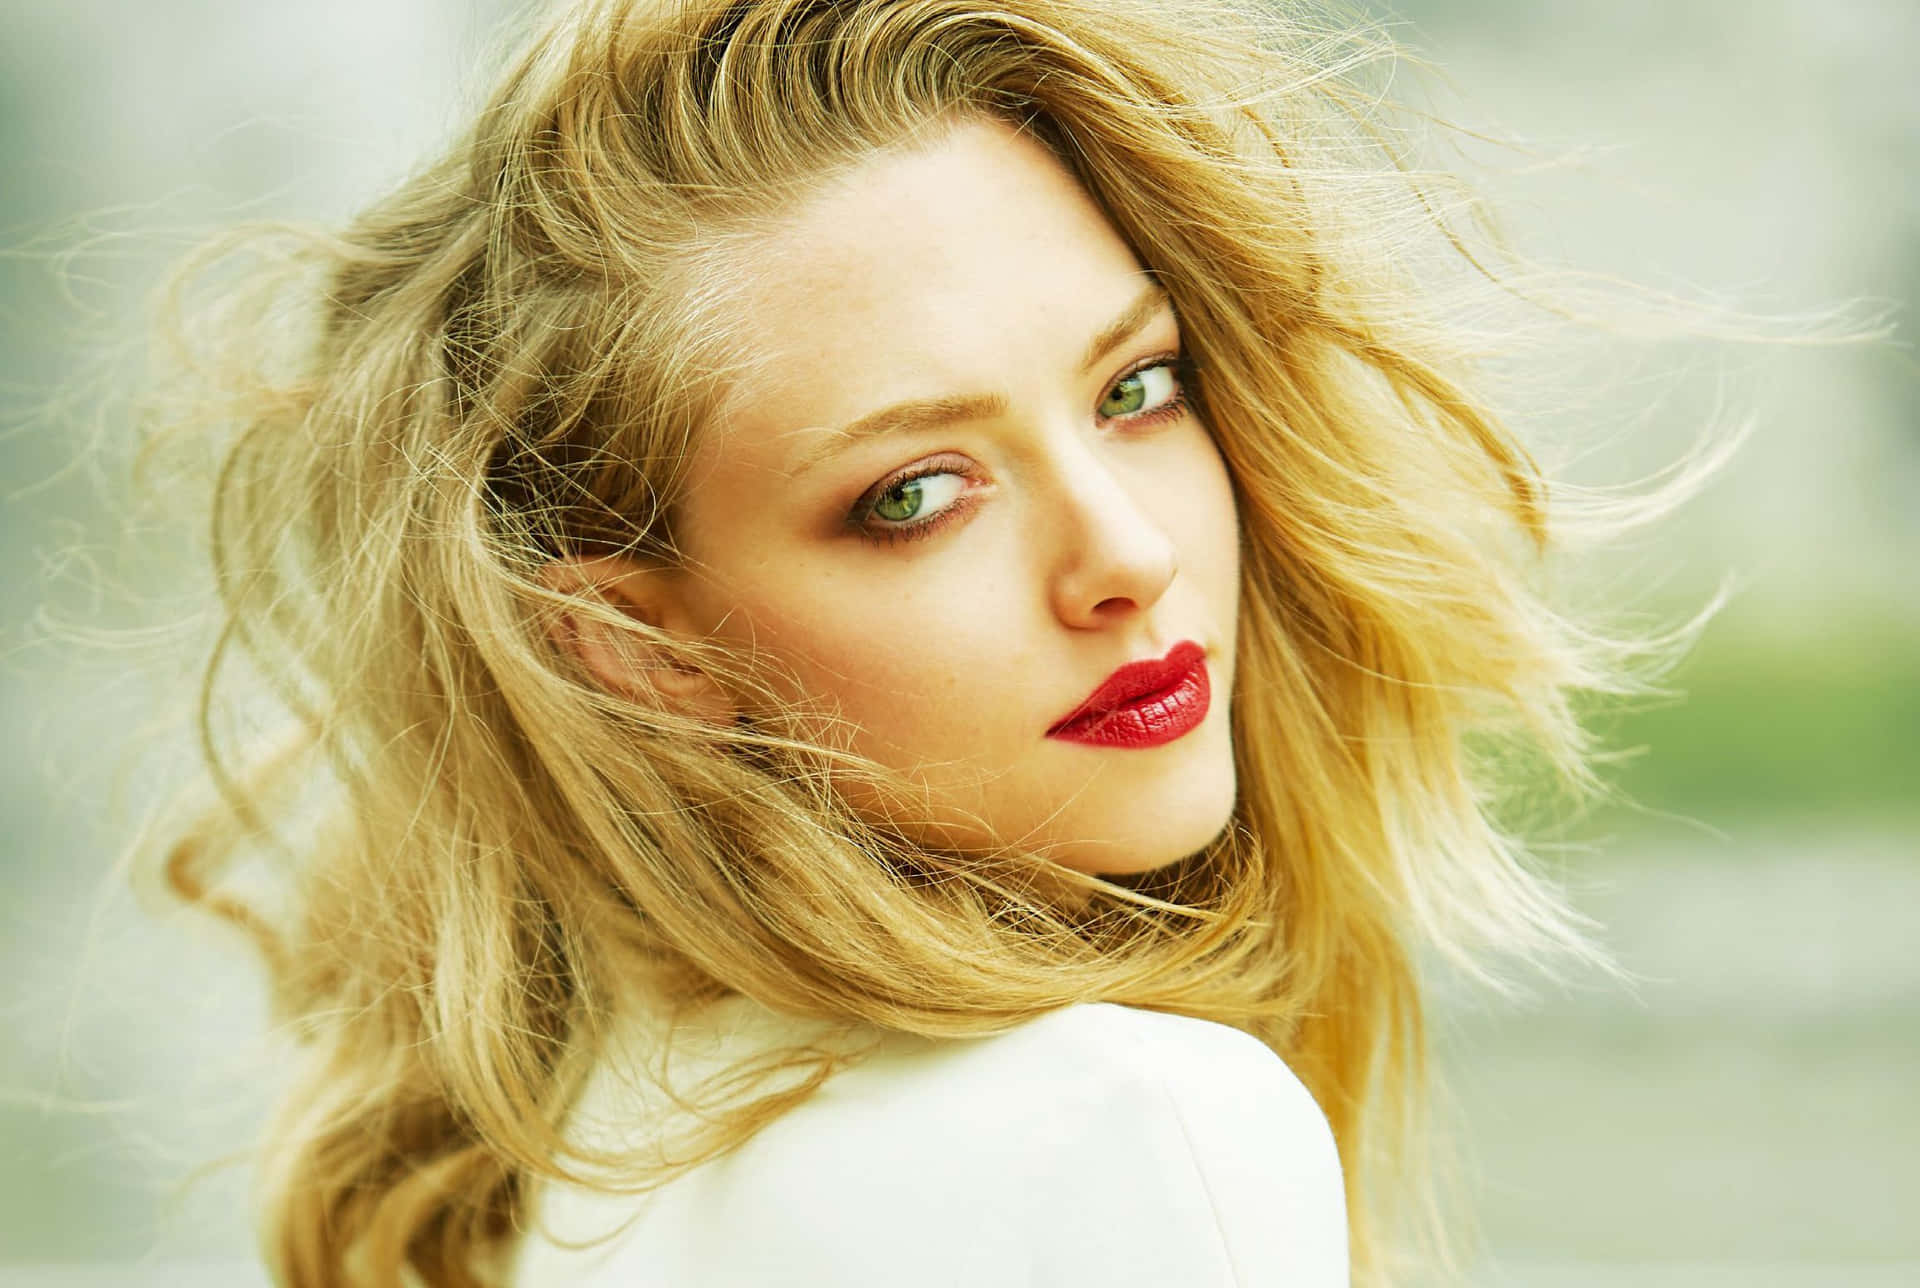 Amanda Seyfried striking a sophisticated pose with her wavy blonde hair and stunning makeup.